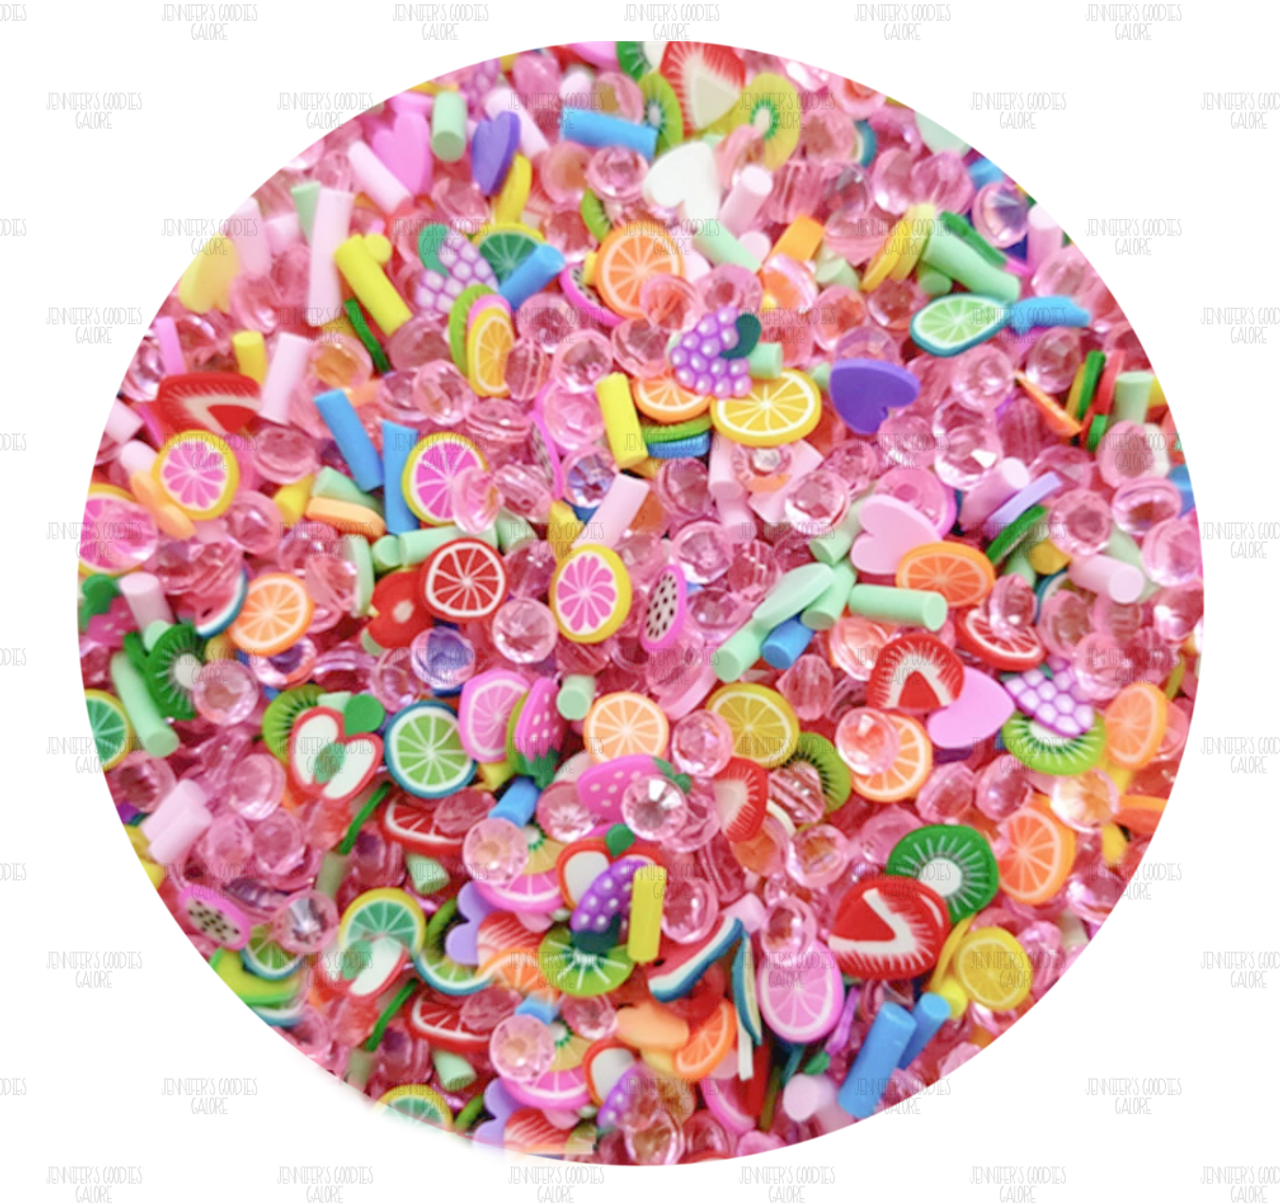 10gm, Polymer Clay Slices, Rainbow Clay Slices, Hearts Clay Slices for  Resin, Clay Slices Crafts, Confetti Loose Clay, Fruit Clay Slices, Sprinkle